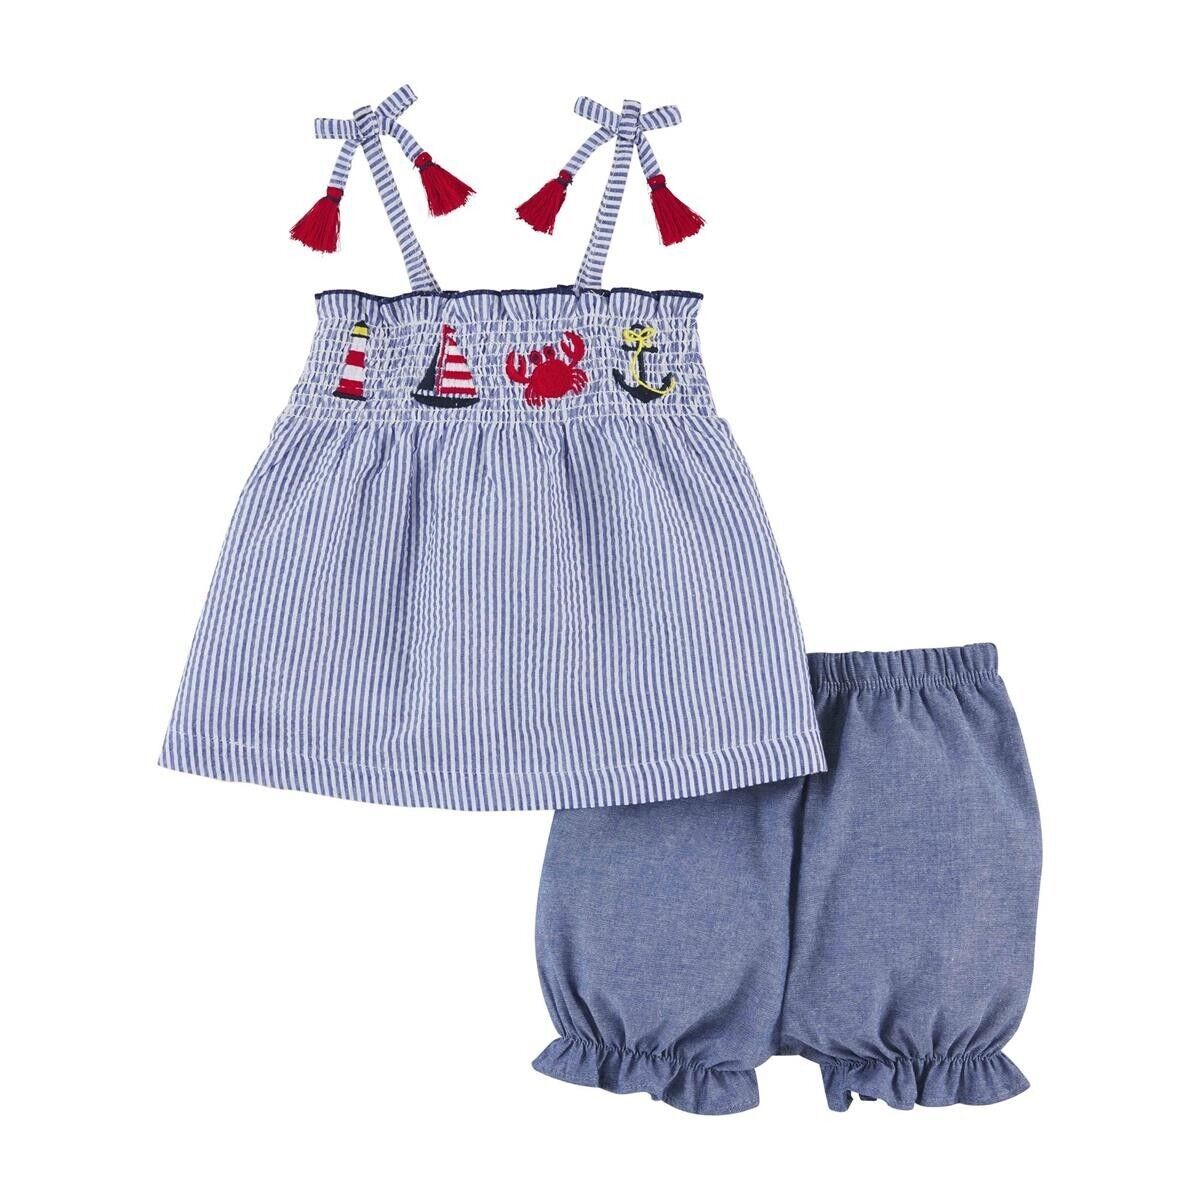 Mud Pie Toddler Girl Sail Away Smocked  Two Piece Short Set Size 2T-3T NEW